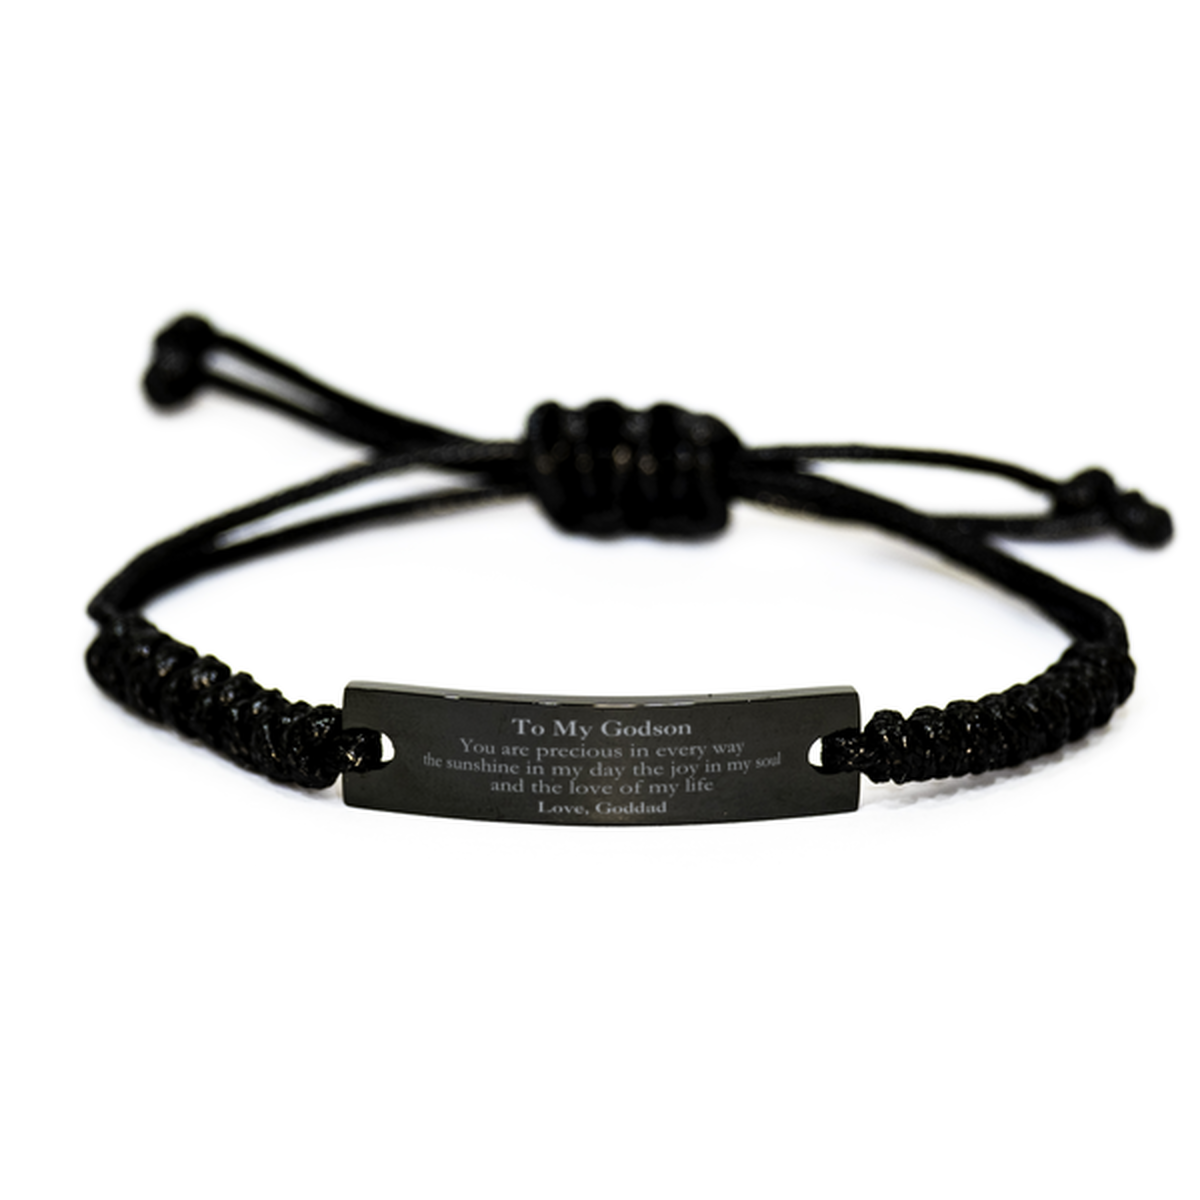 Graduation Gifts for Godson Black Rope Bracelet Present from Goddad, Christmas Godson Birthday Gifts Godson You are precious in every way the sunshine in my day. Love, Goddad